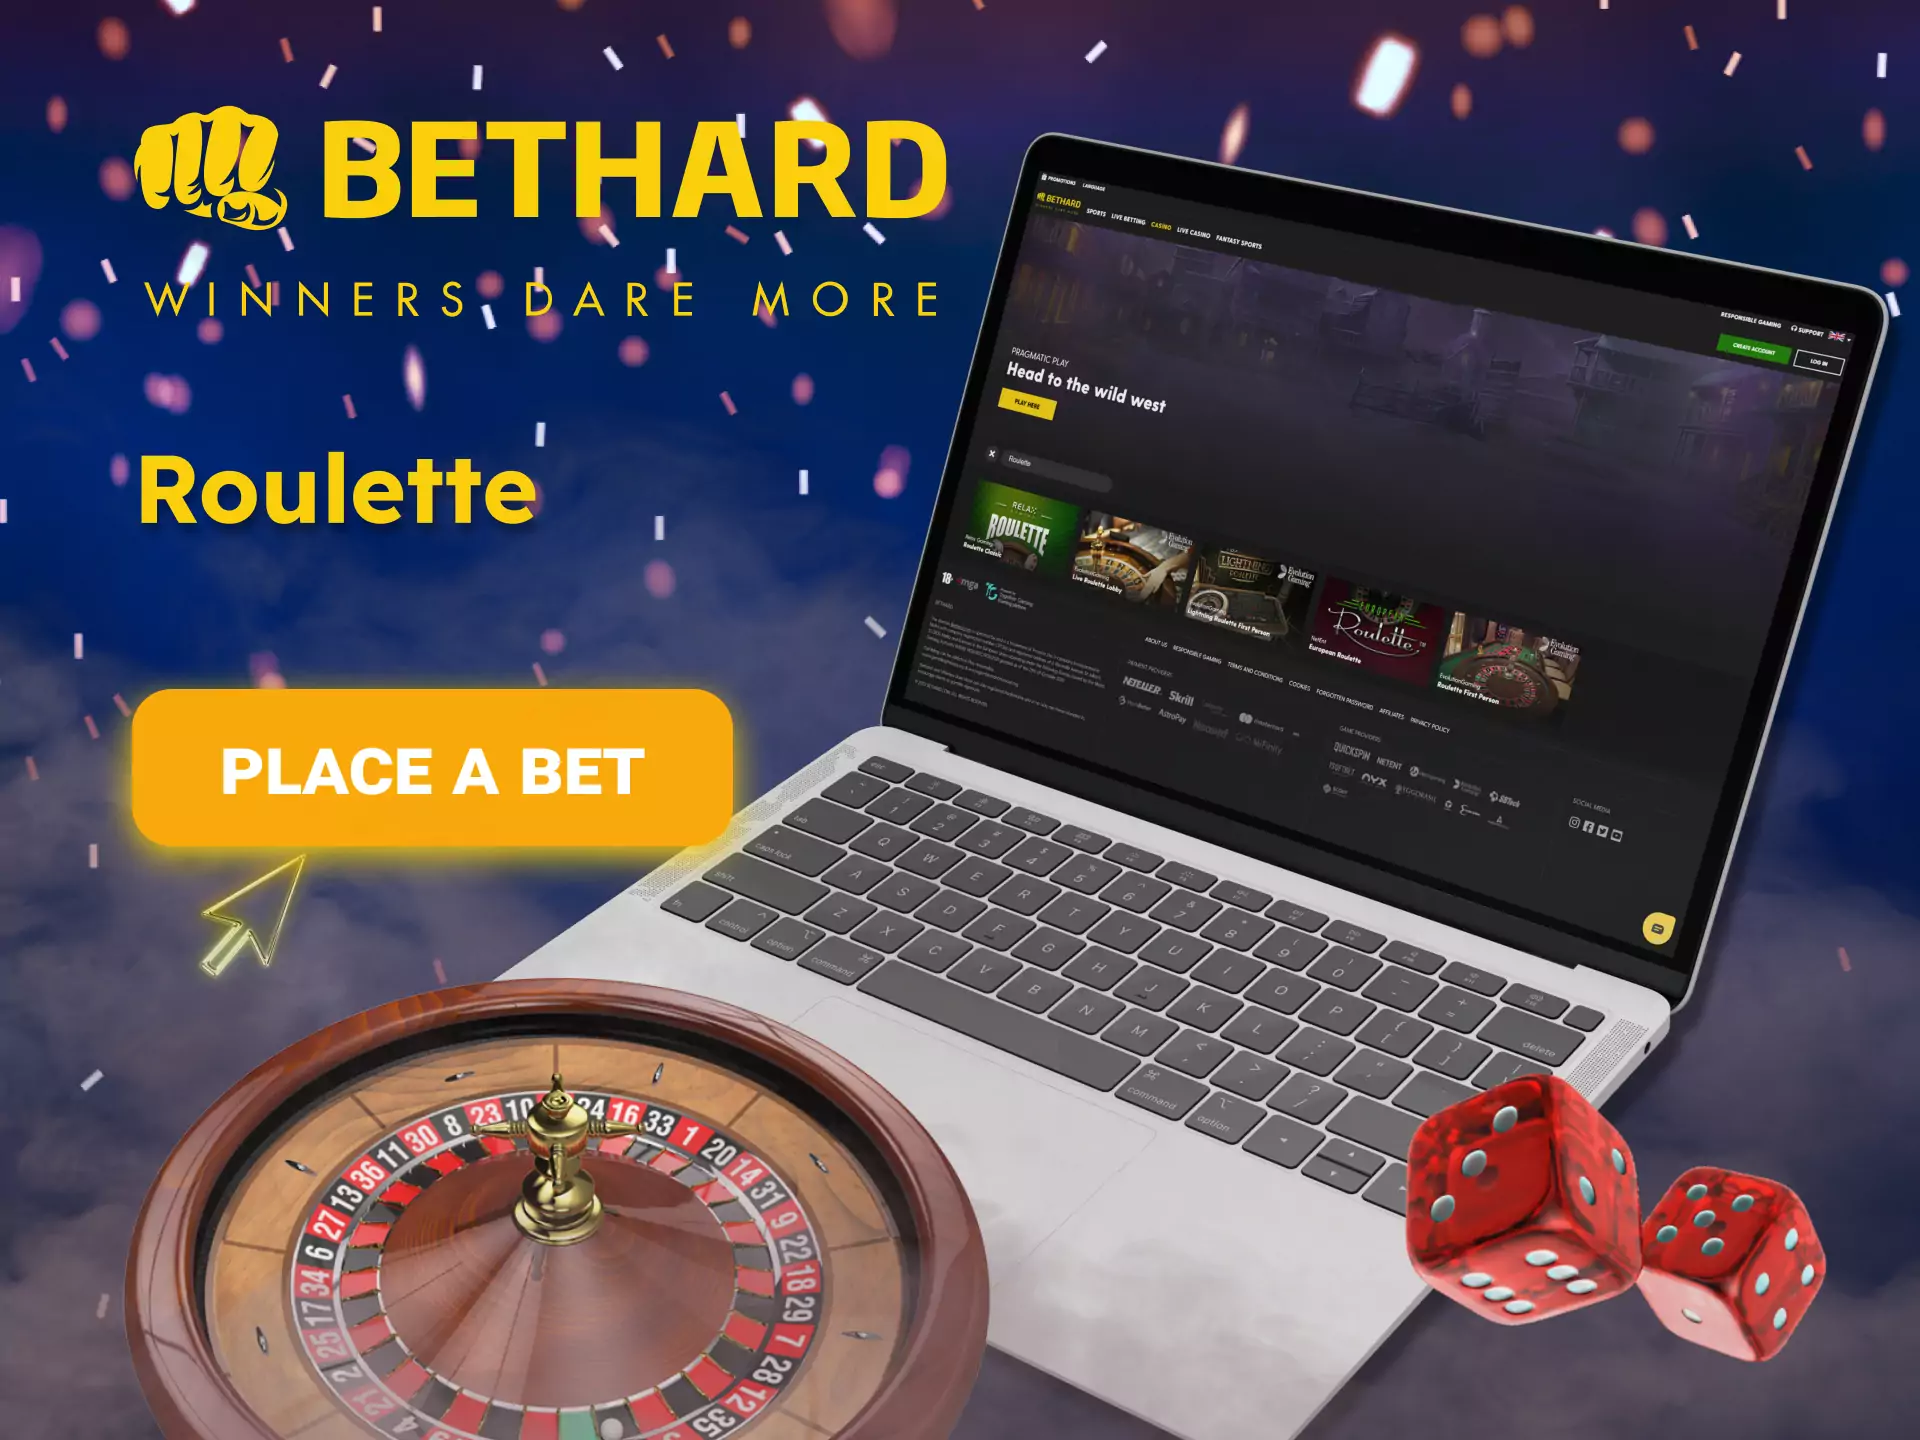 Place a bet on your favorite number in a roulette game with Bethard.